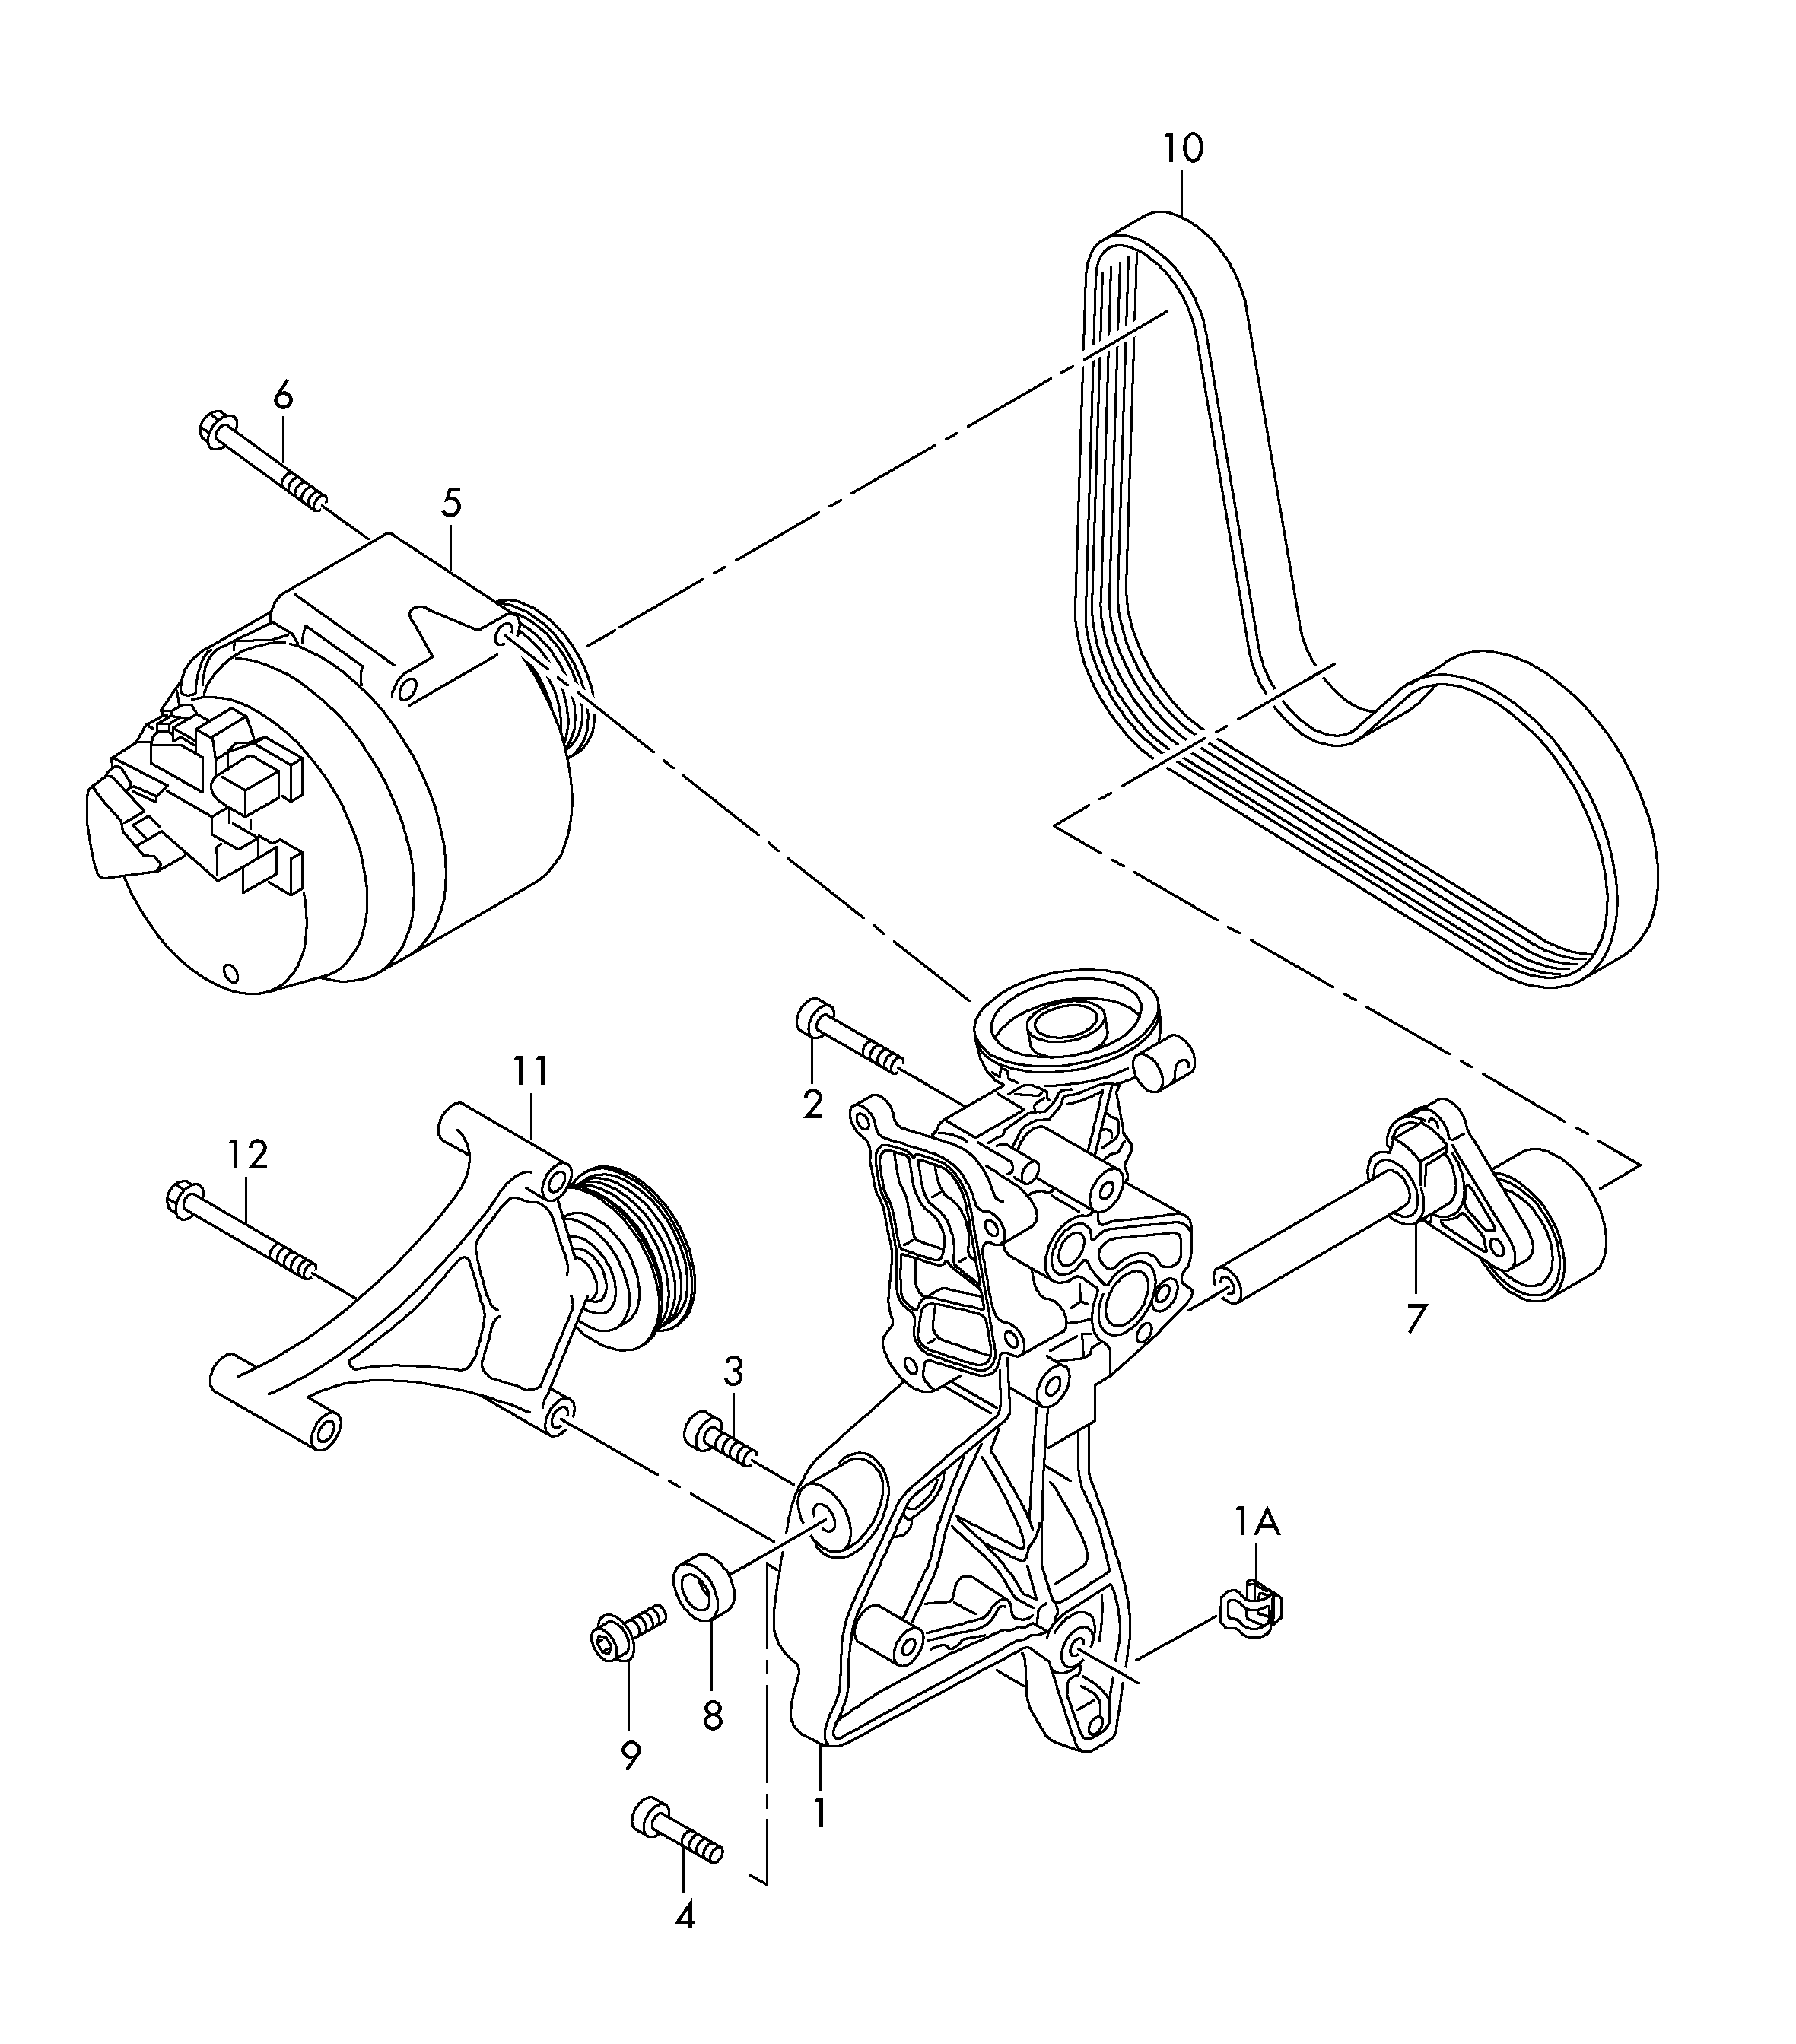 connecting and mounting parts<br>for alternatorPoly-V-belt 1.8/2.0Ltr. - Octavia - oct